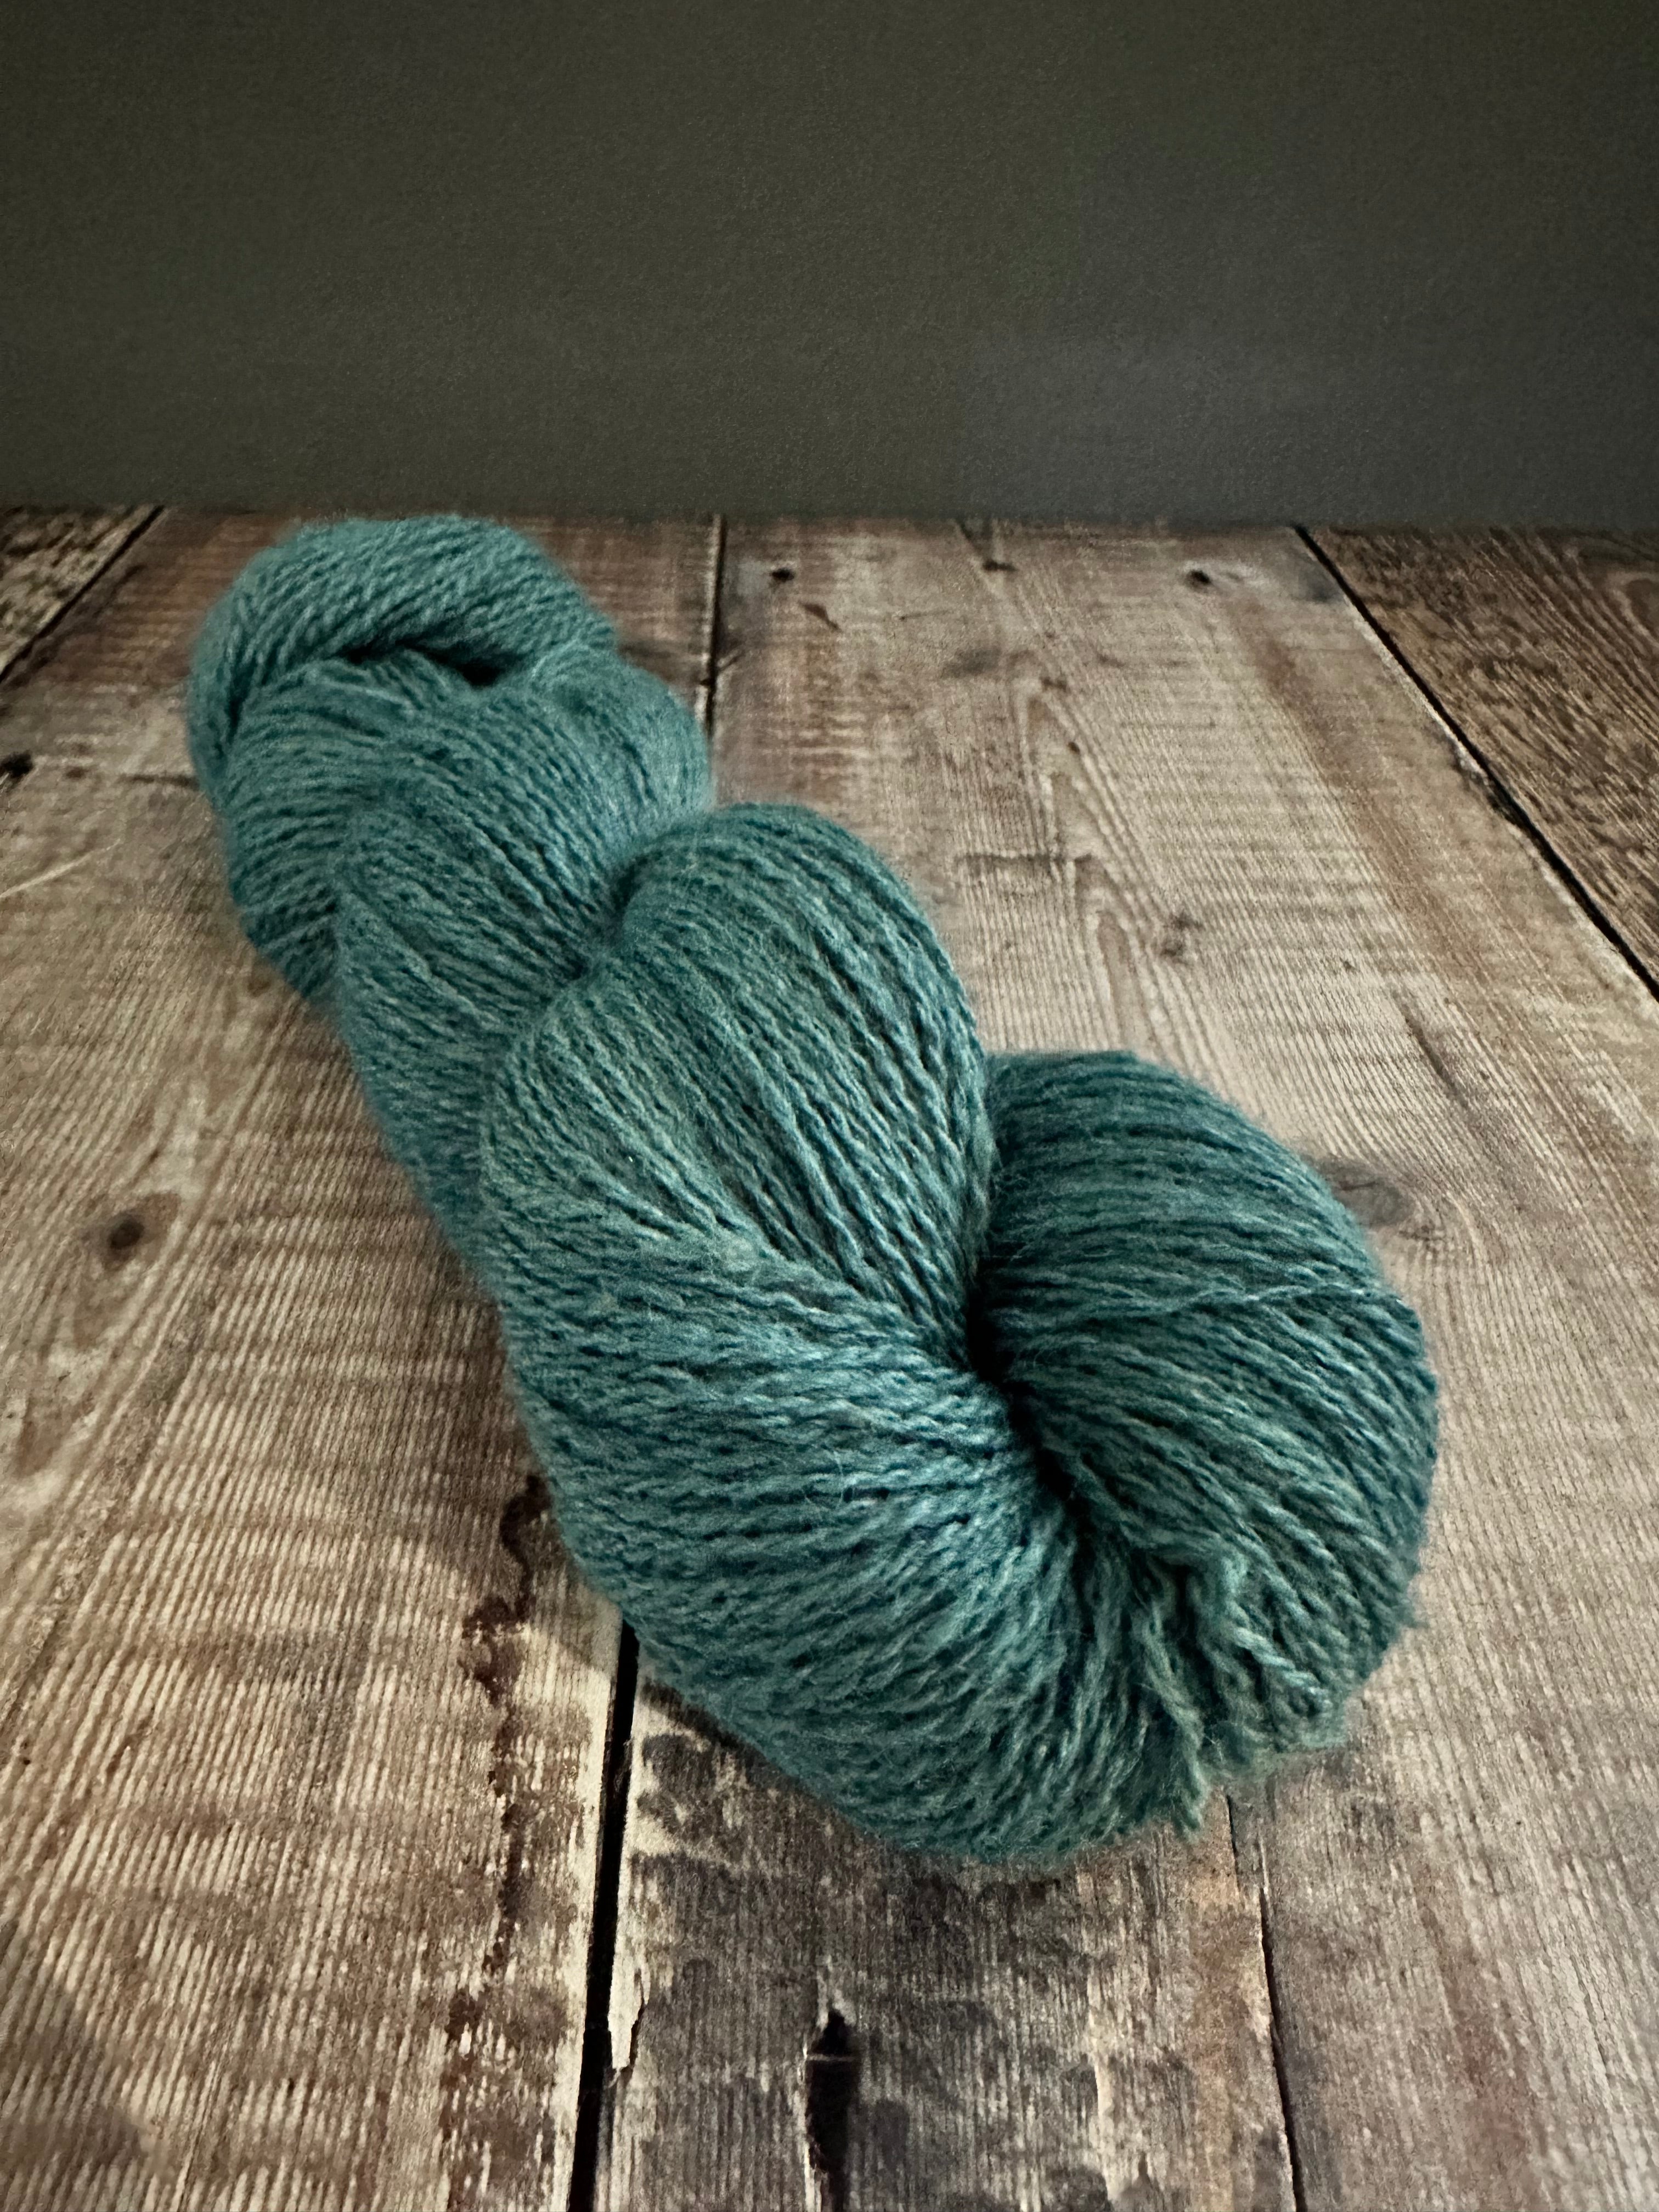 Hand Dyed 70% Cheviot & 30% Soy 4ply yarn 100g Skein